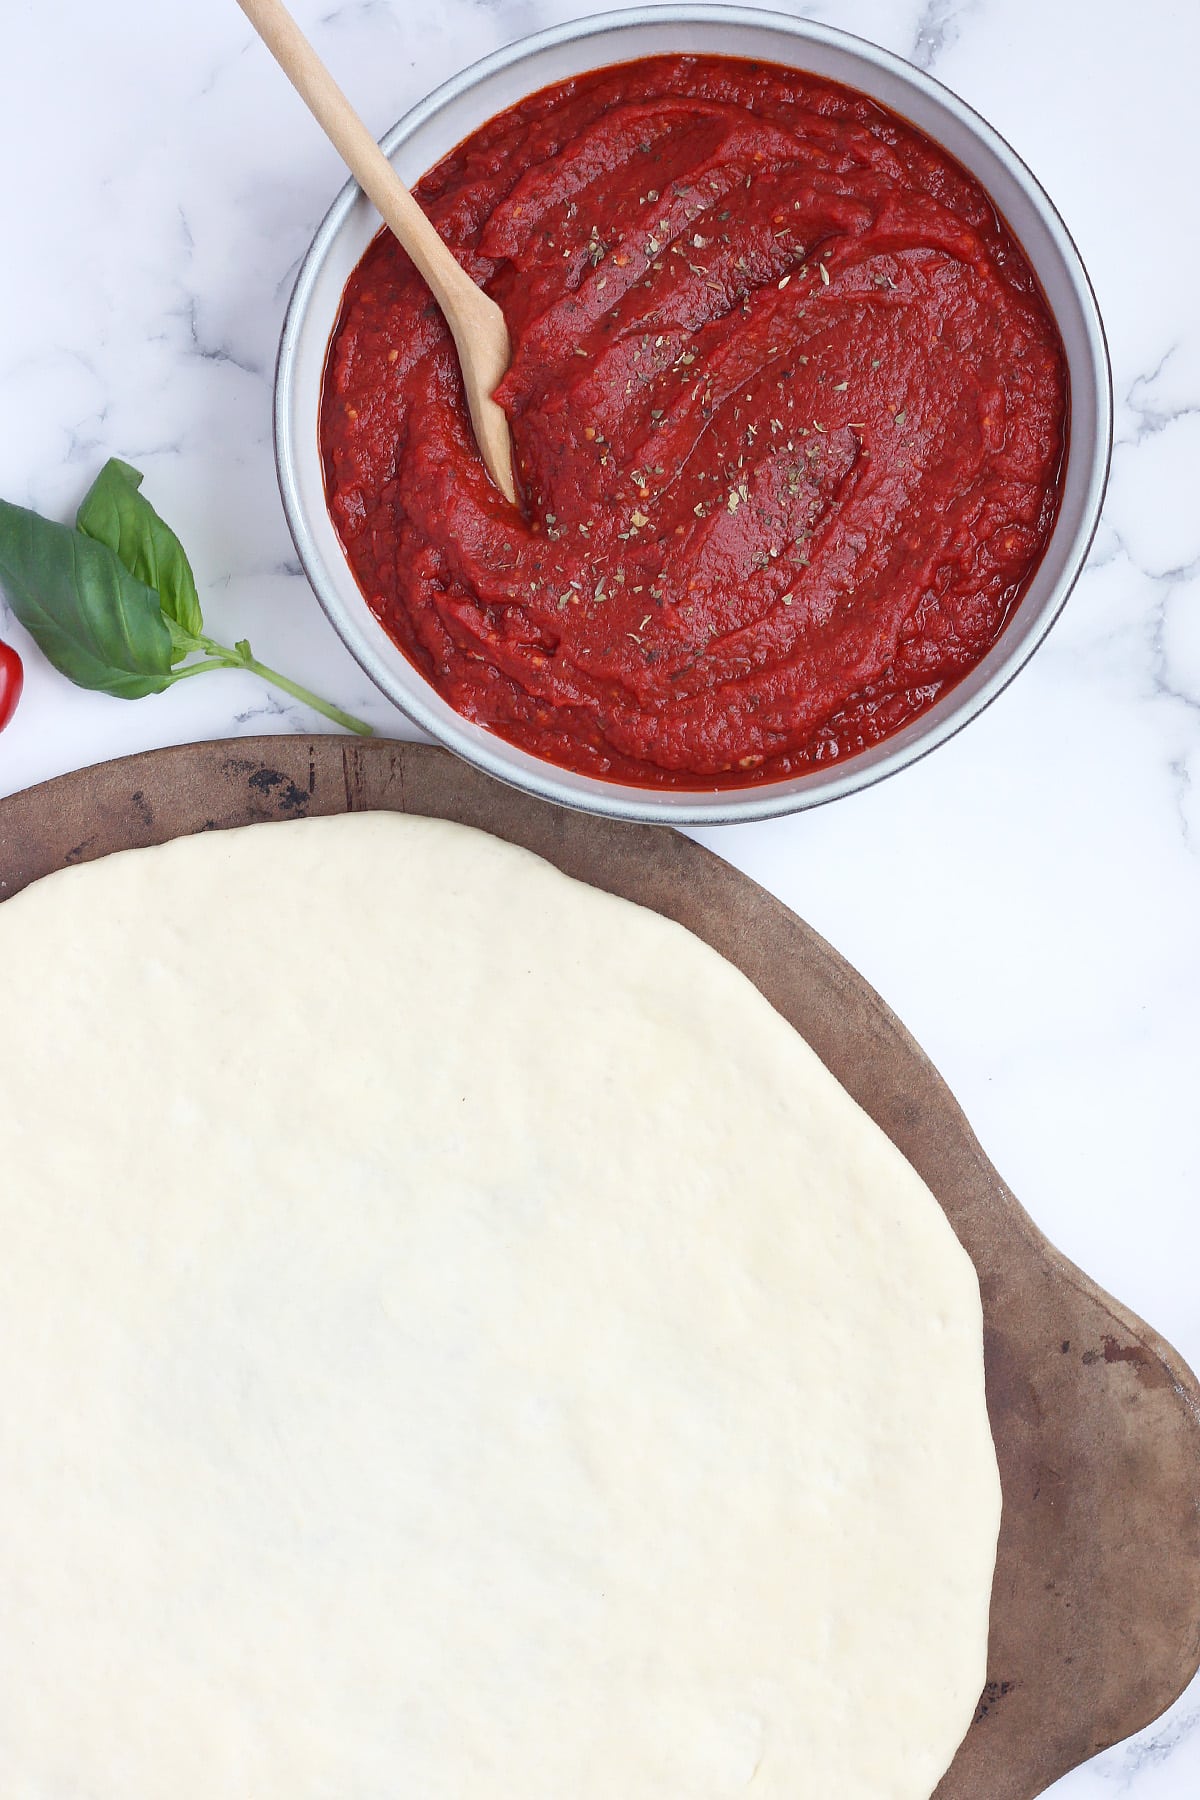 A bowl of pizza sauce near the pizza dough is rolled onto the pizza stone.